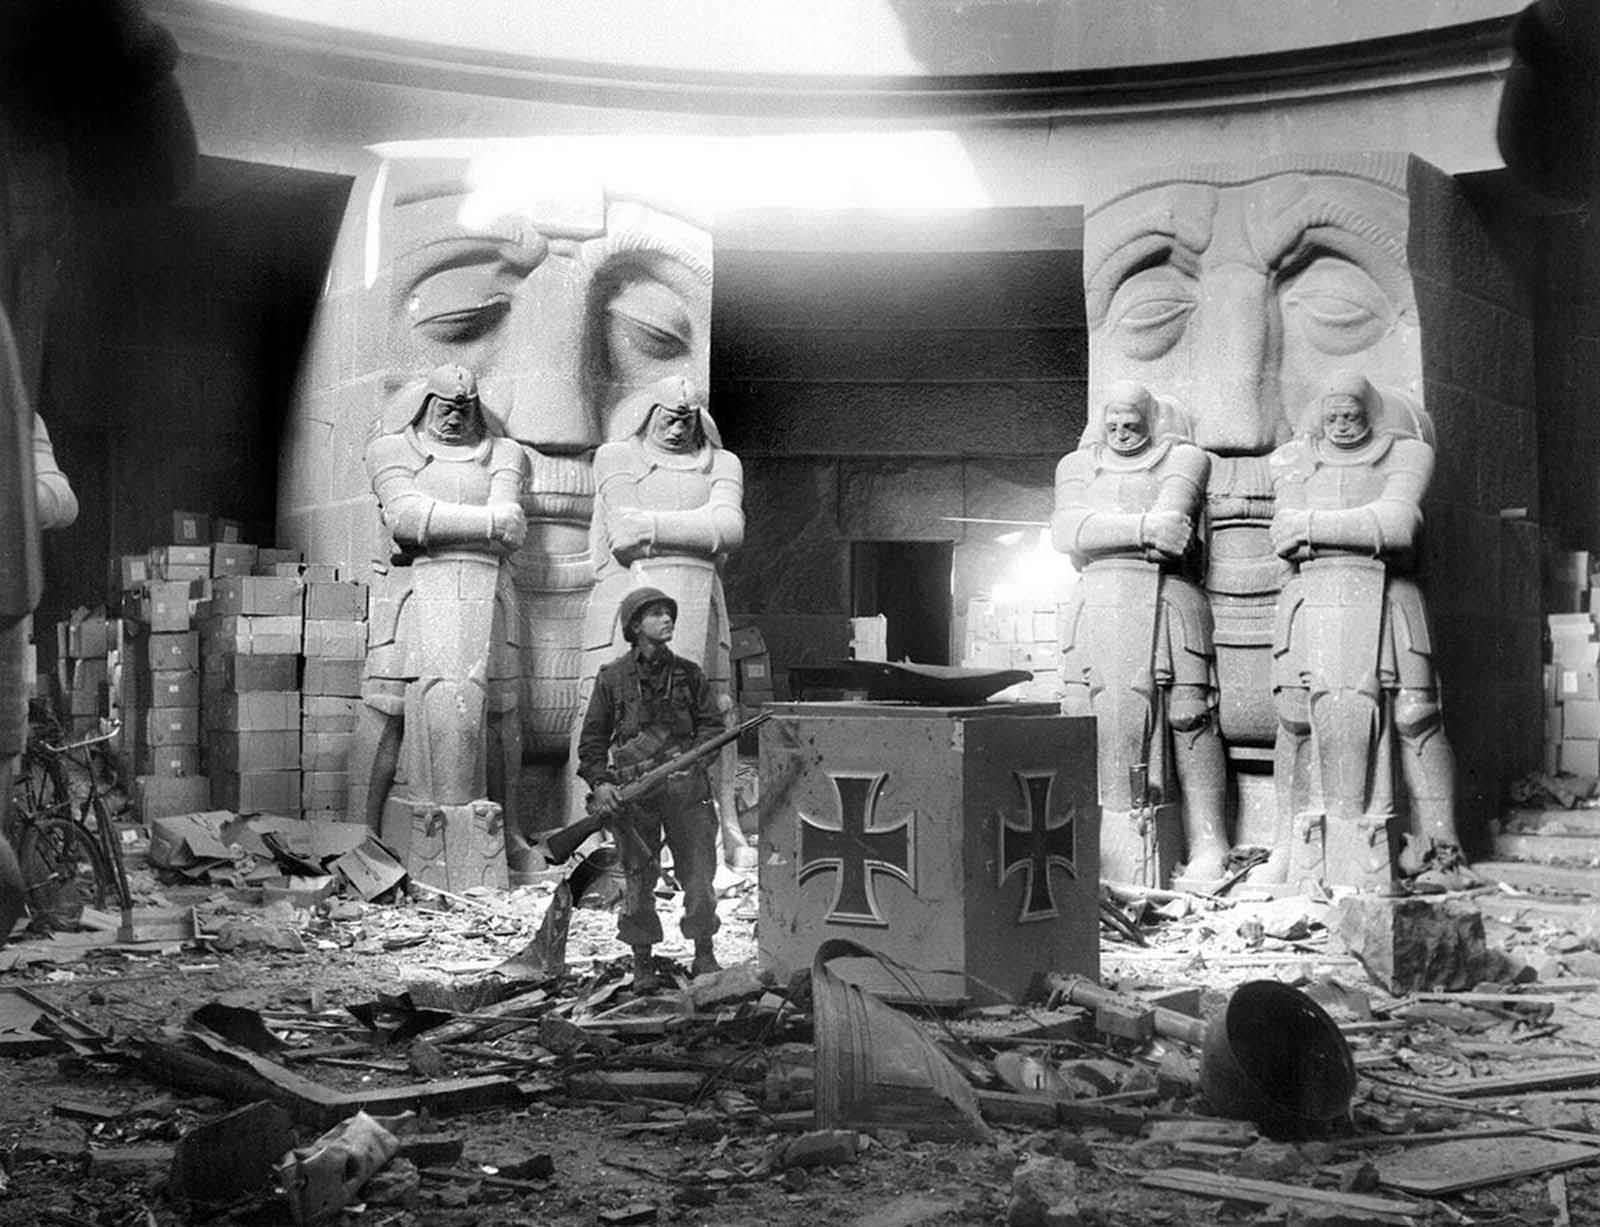 A U.S. soldier stands in the middle of rubble in the Monument of the Battle of the Nations in Leipzig after they attacked the city on April 18, 1945. The huge monument commemorating the defeat of Napoleon in 1813 was one of the last strongholds in the city to surrender. One hundred and fifty SS fanatics with ammunition and foodstuffs stored in the structure to last three months dug themselves in and were determined to hold out as long as their supplies would allow. American First Army artillery eventually blasted the SS troops into surrender.